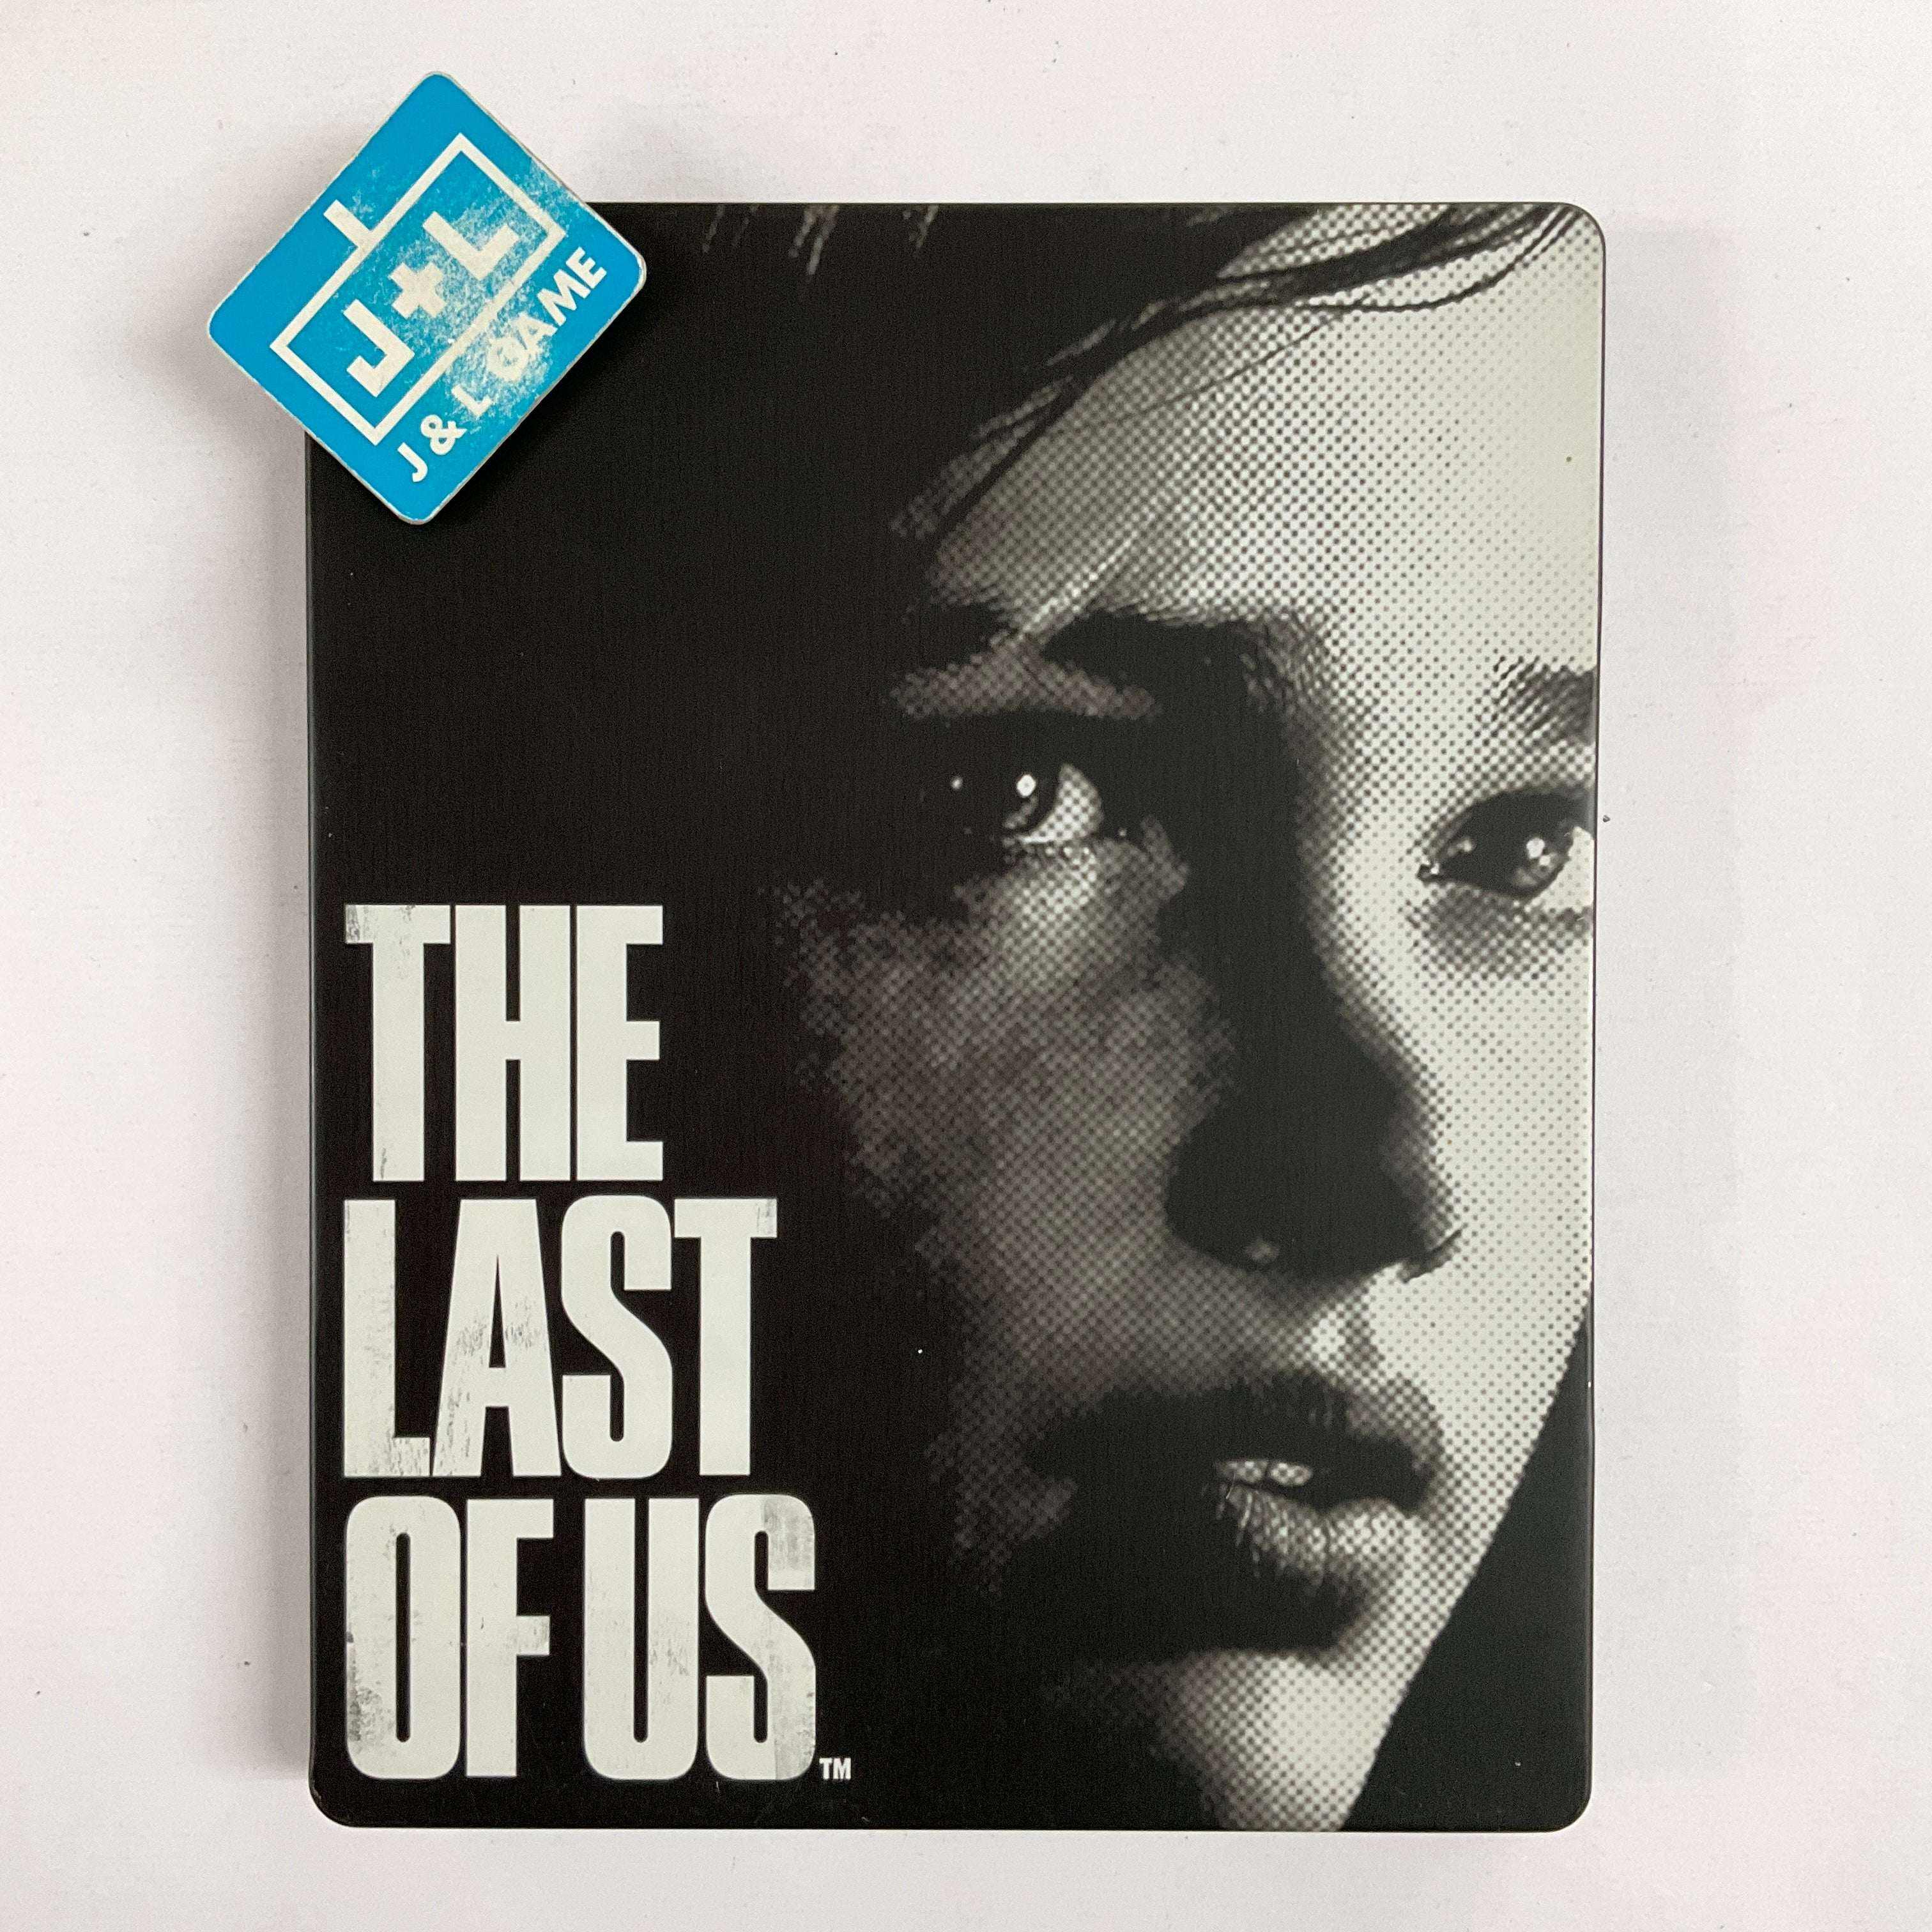 The Last of Us (Survival Edition) - (PS3) PlayStation 3 [Pre-Owned] Video Games SCEI   